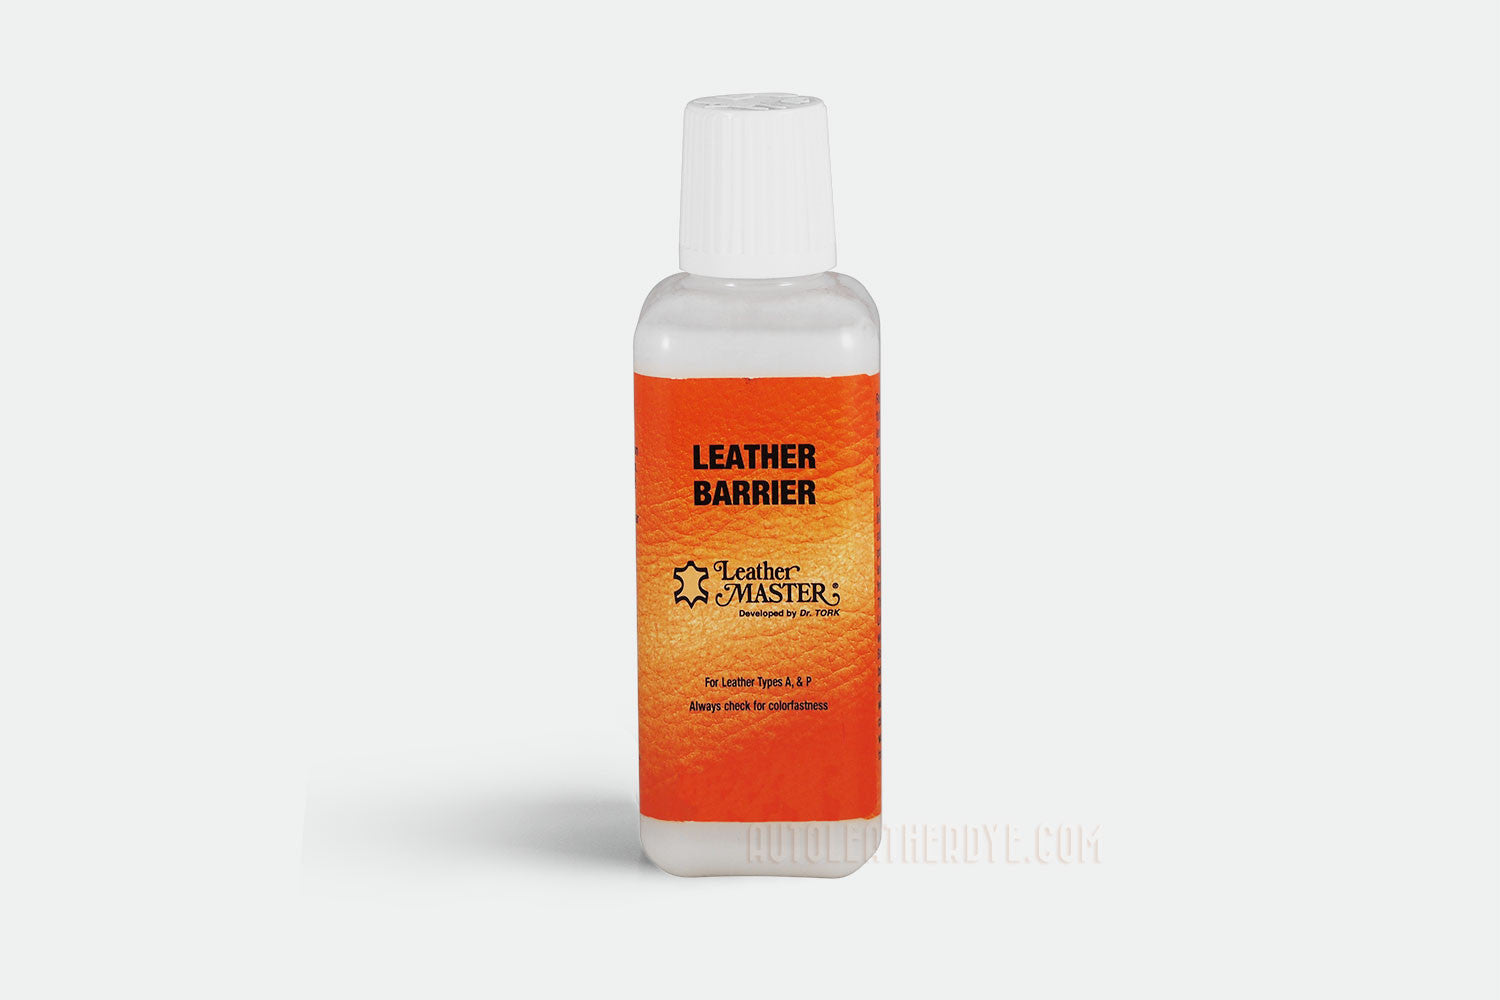 Leather Master Leather Barrier 250ml